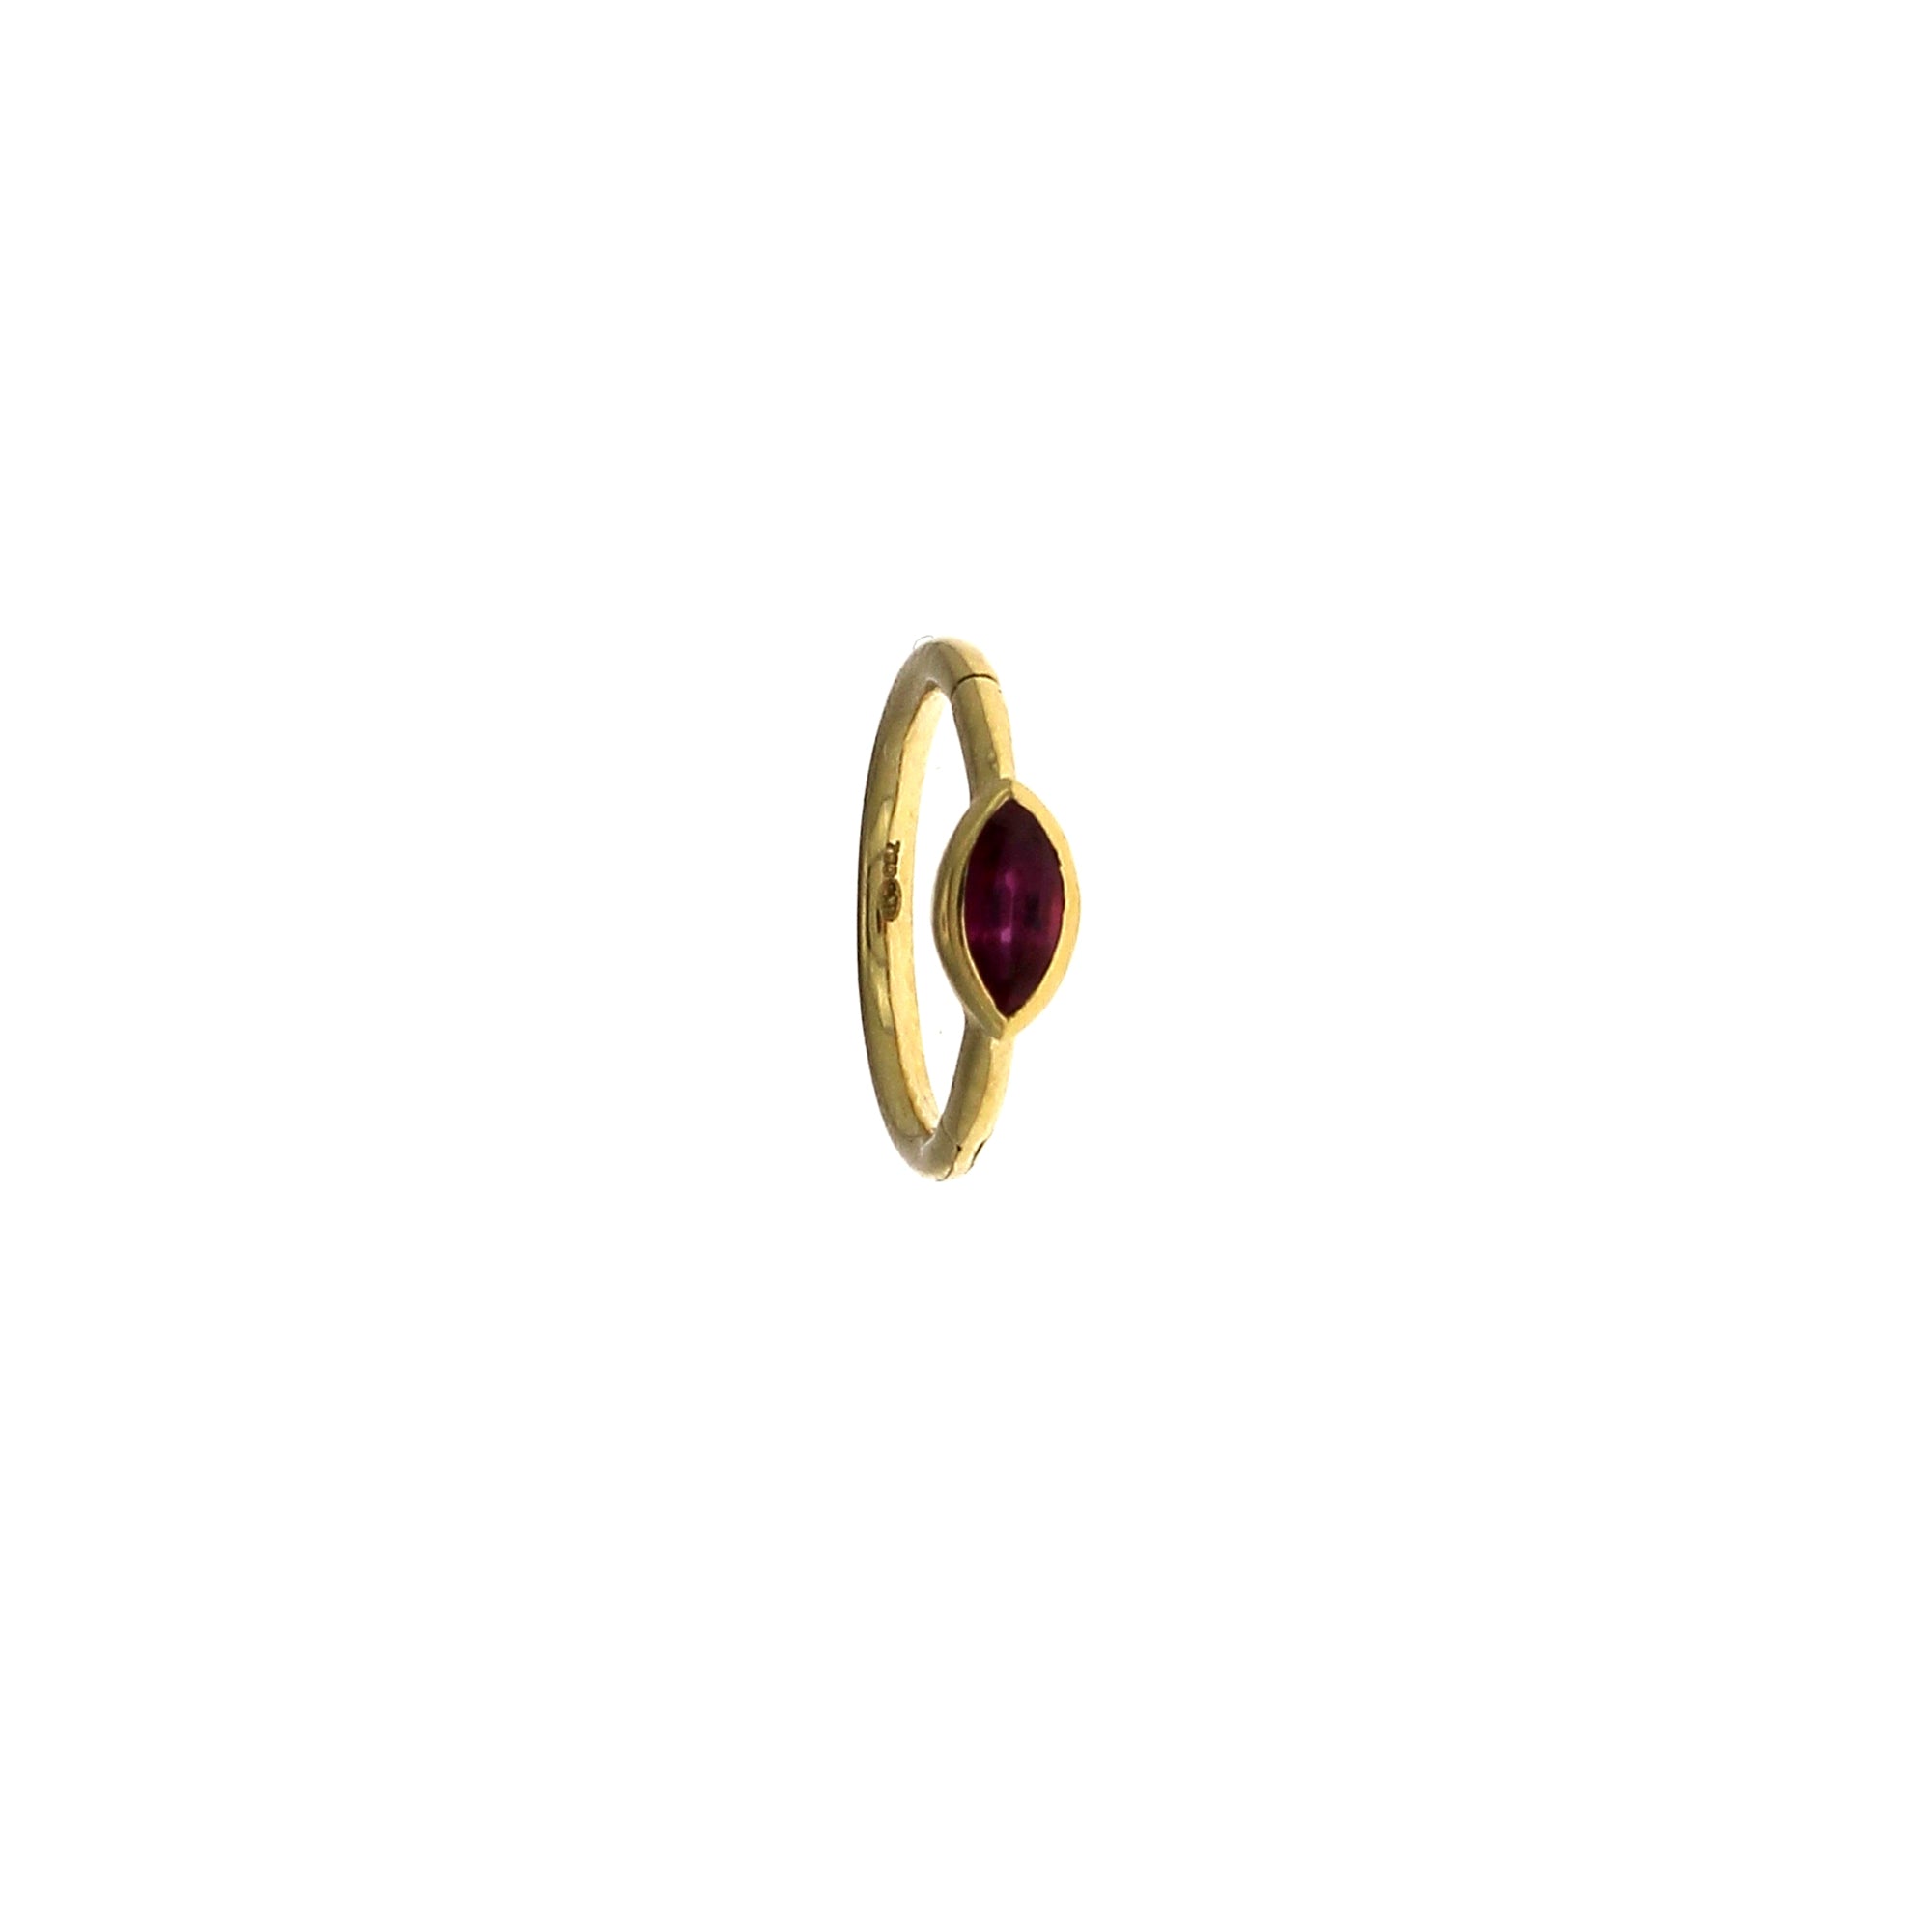 Créole 8mm Rubis Marquise 3x2mm Or Jaune